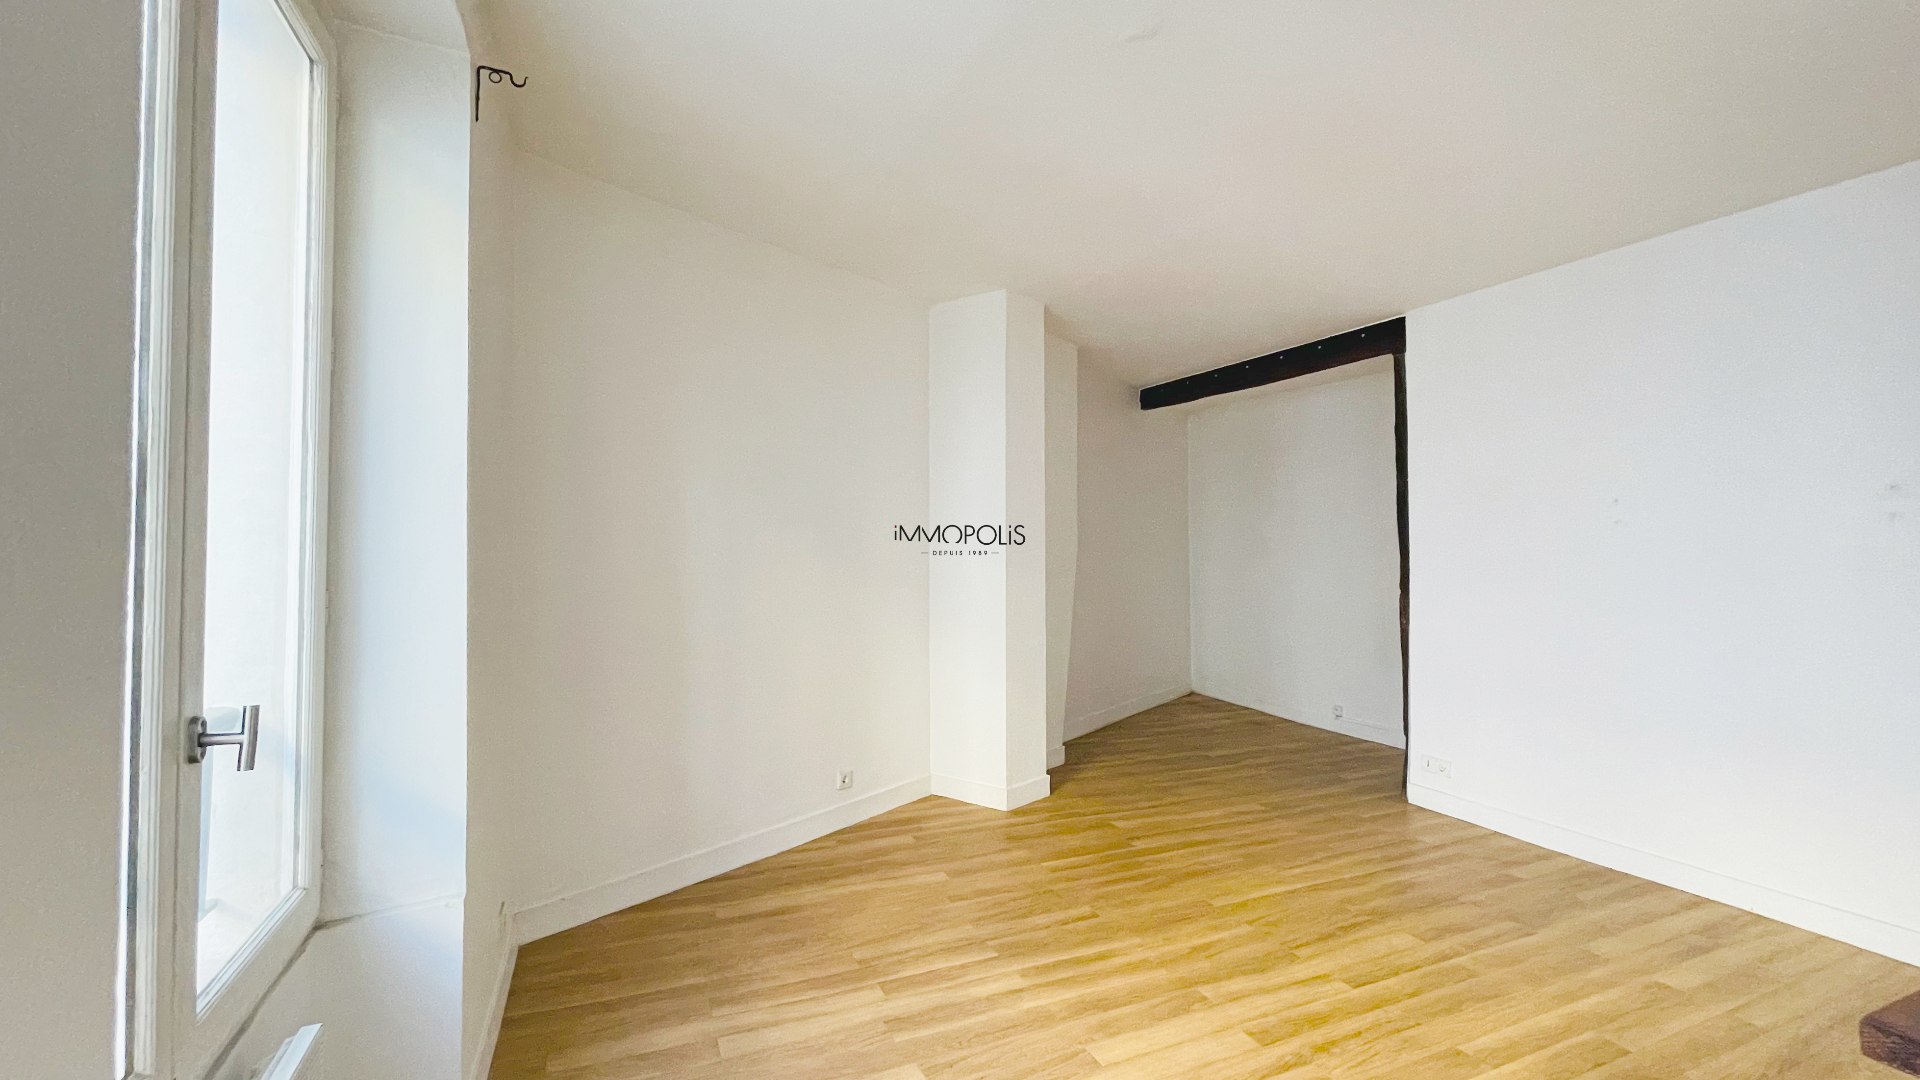 Beautiful studio in Montmartre, 30 m² without loss of space located in a swallowed building 5